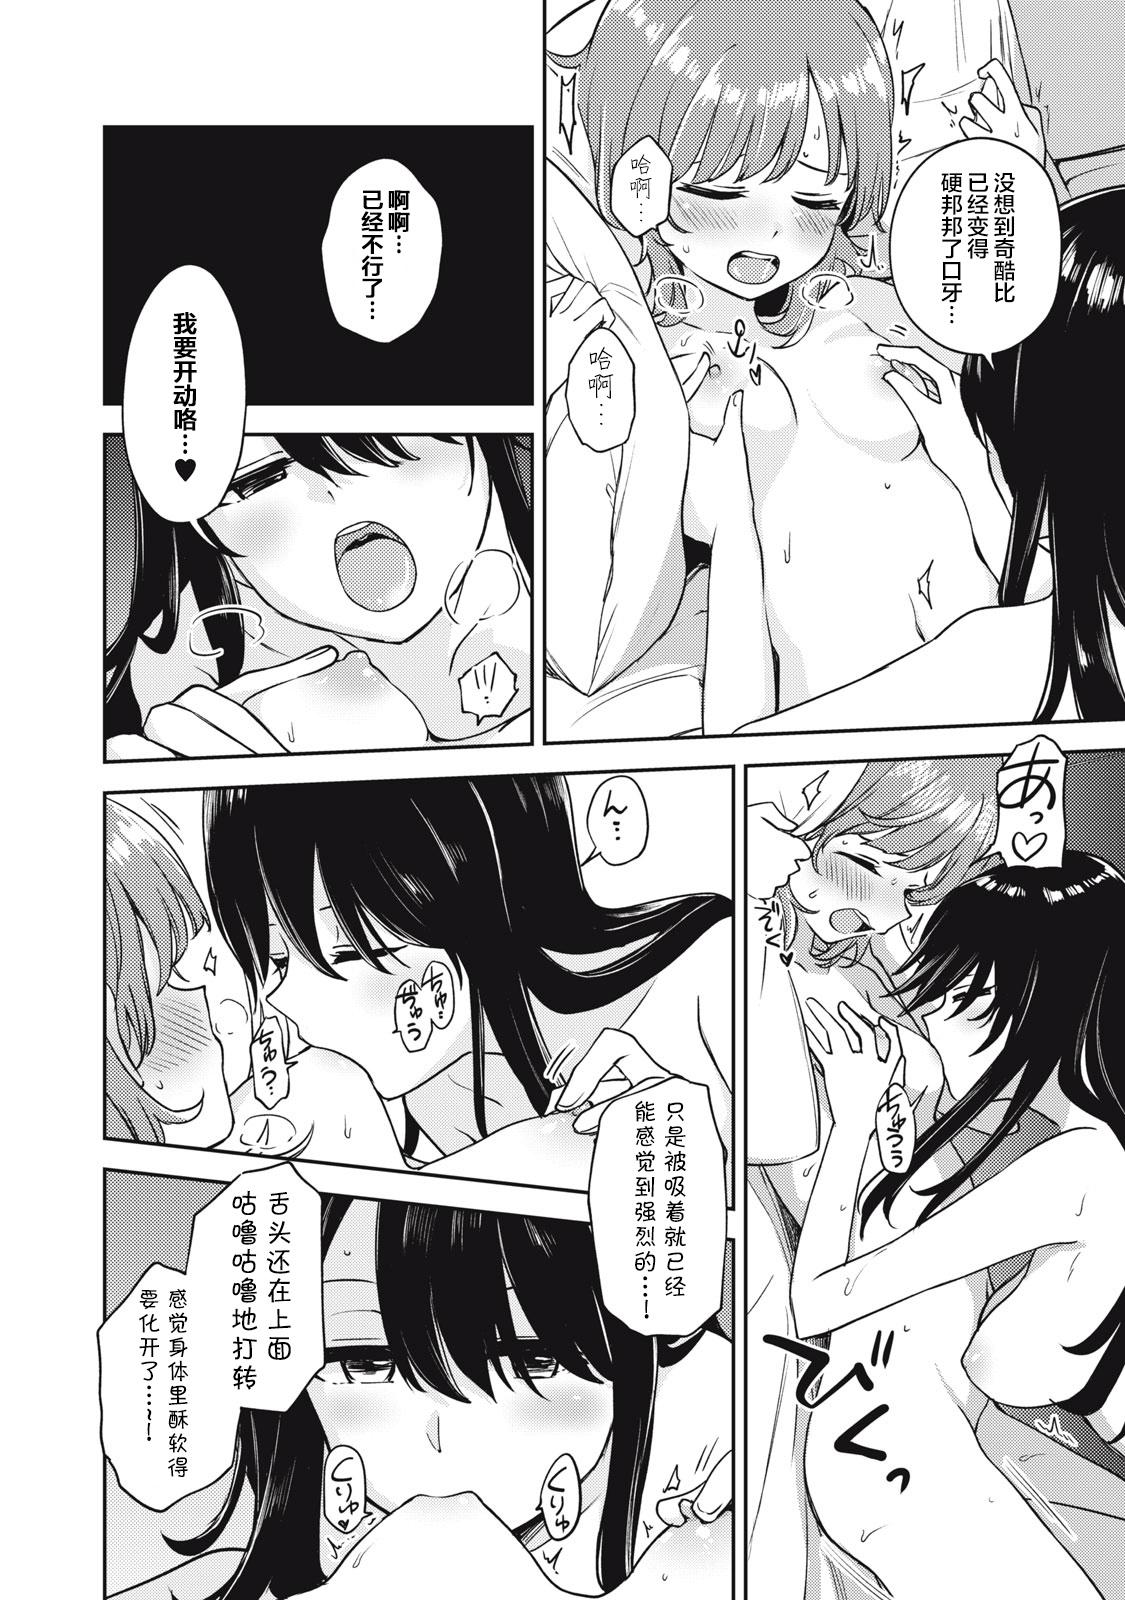 Celebrity Sex Asumi-chan Is Interested In Lesbian Brothels! Extra Episode Dicksucking - Page 10